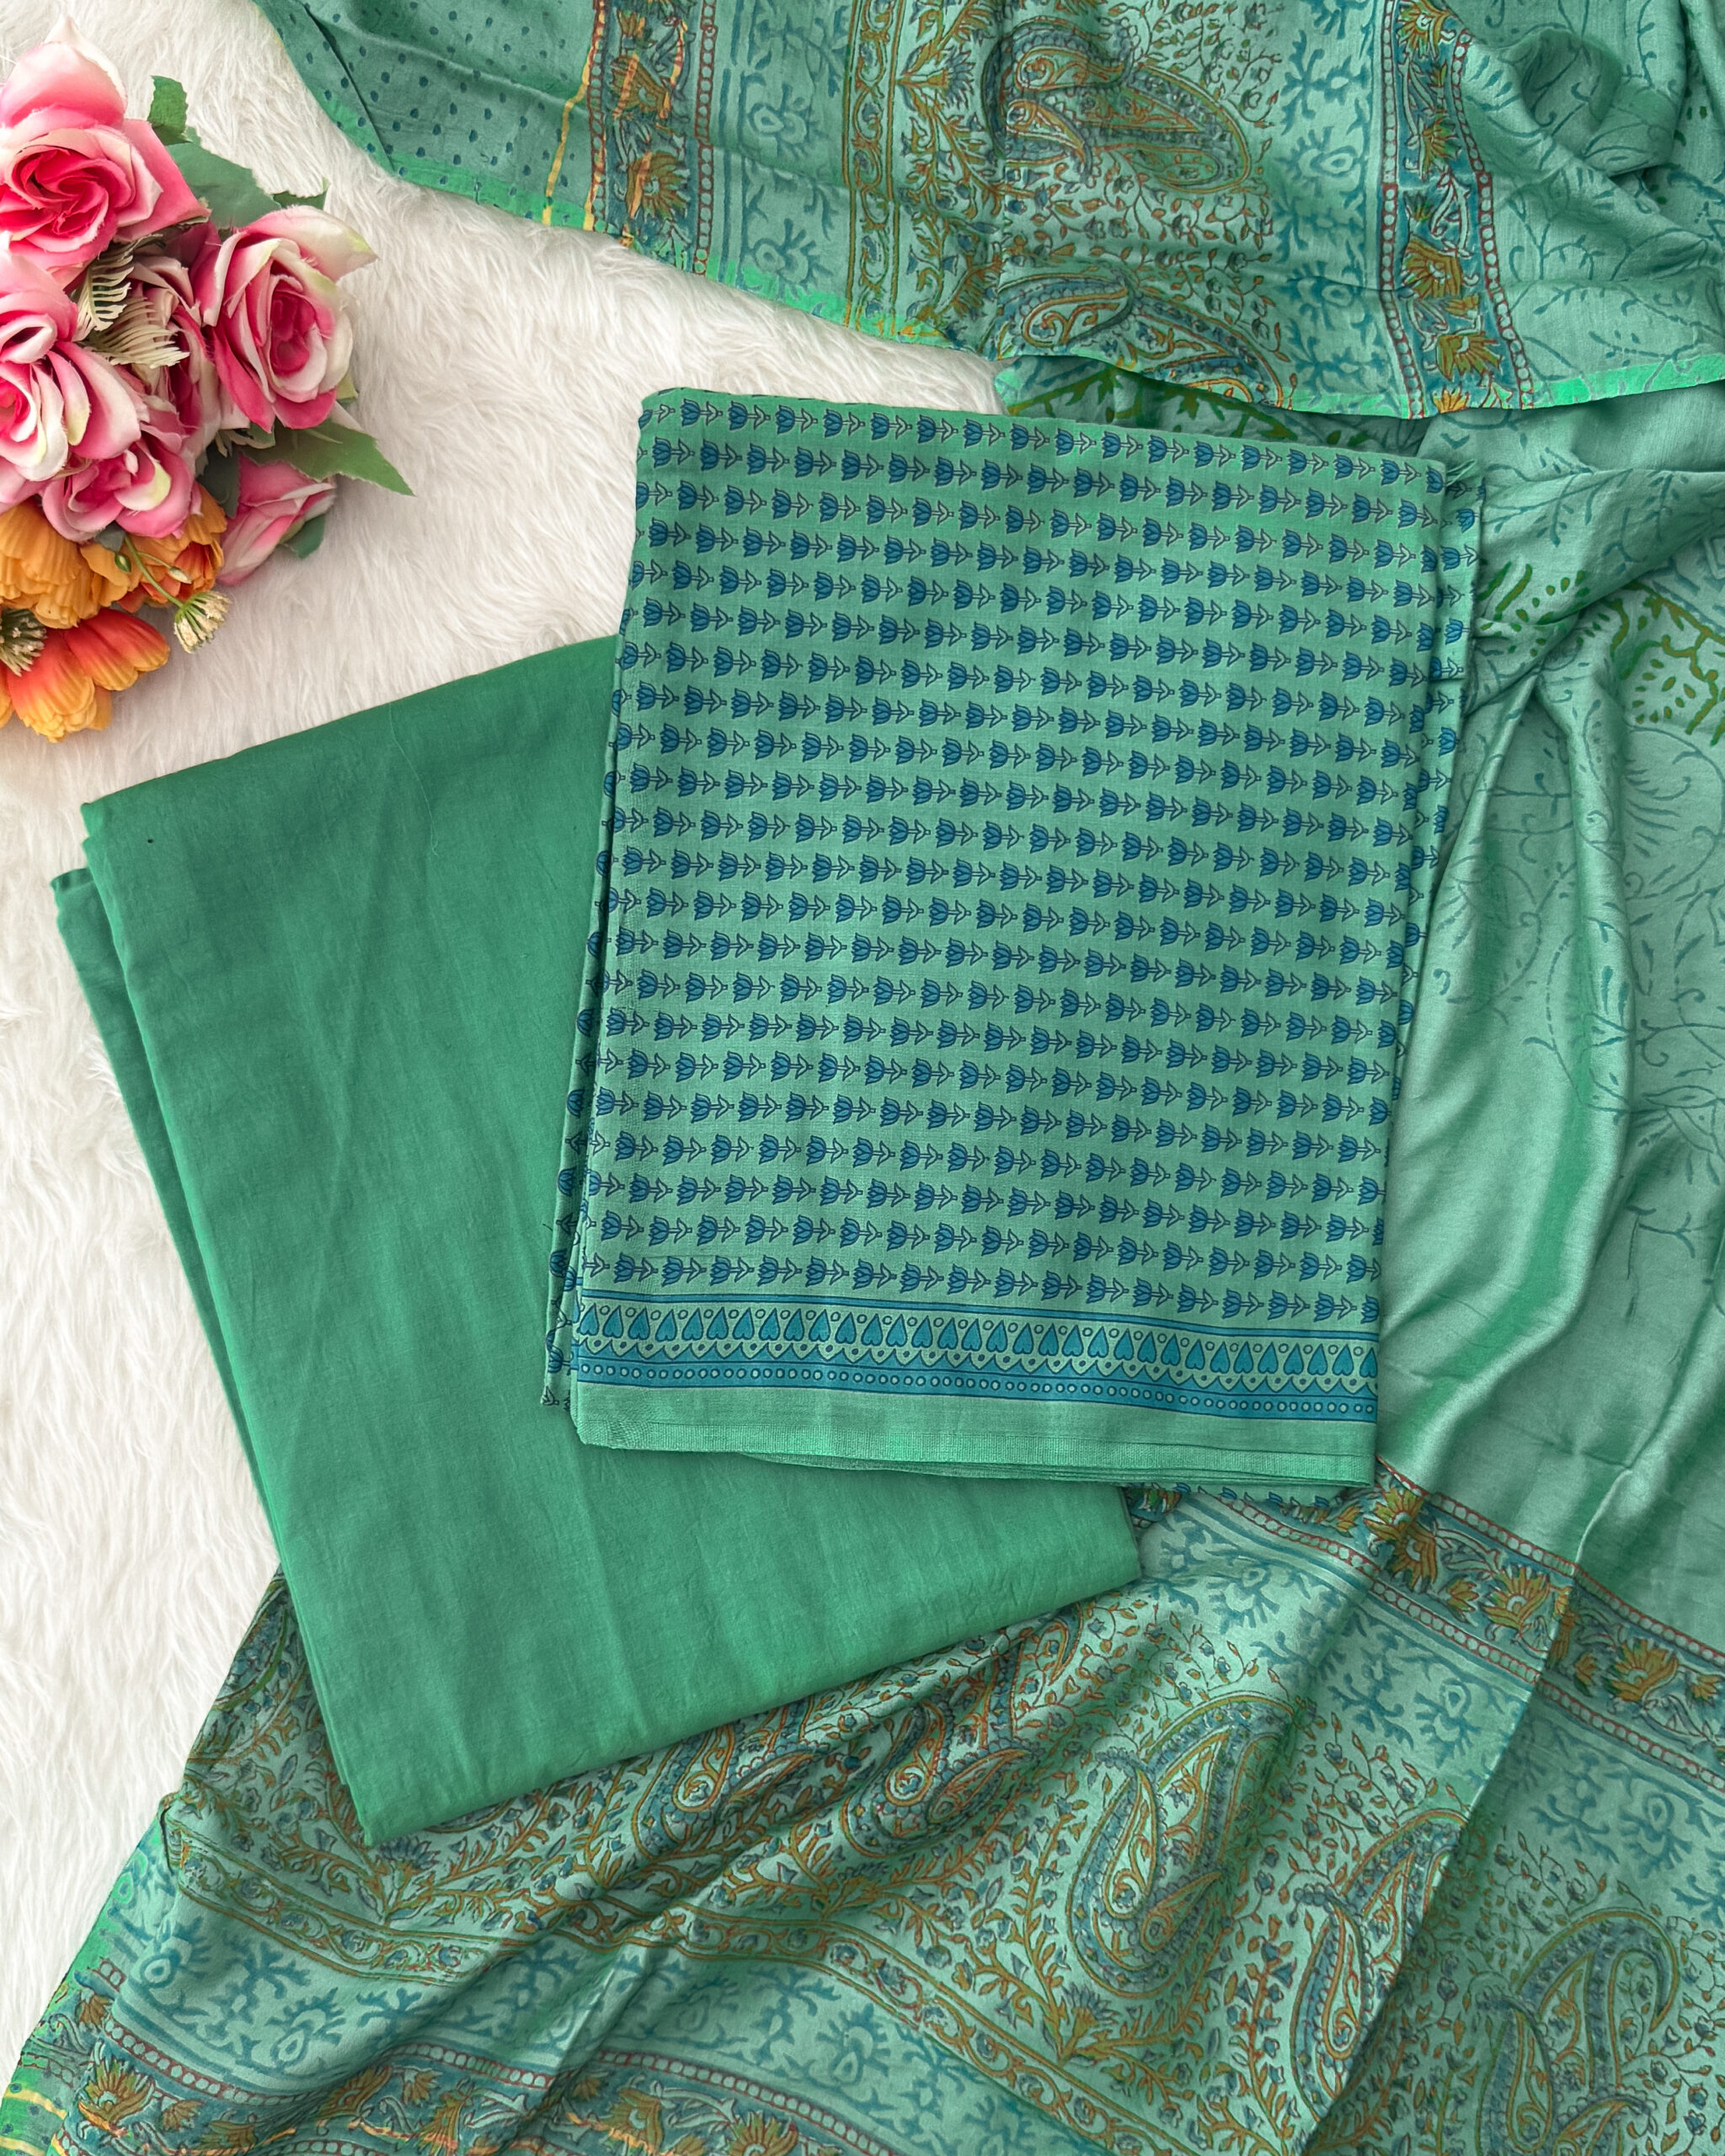 Pure cotton material with beautiful designs